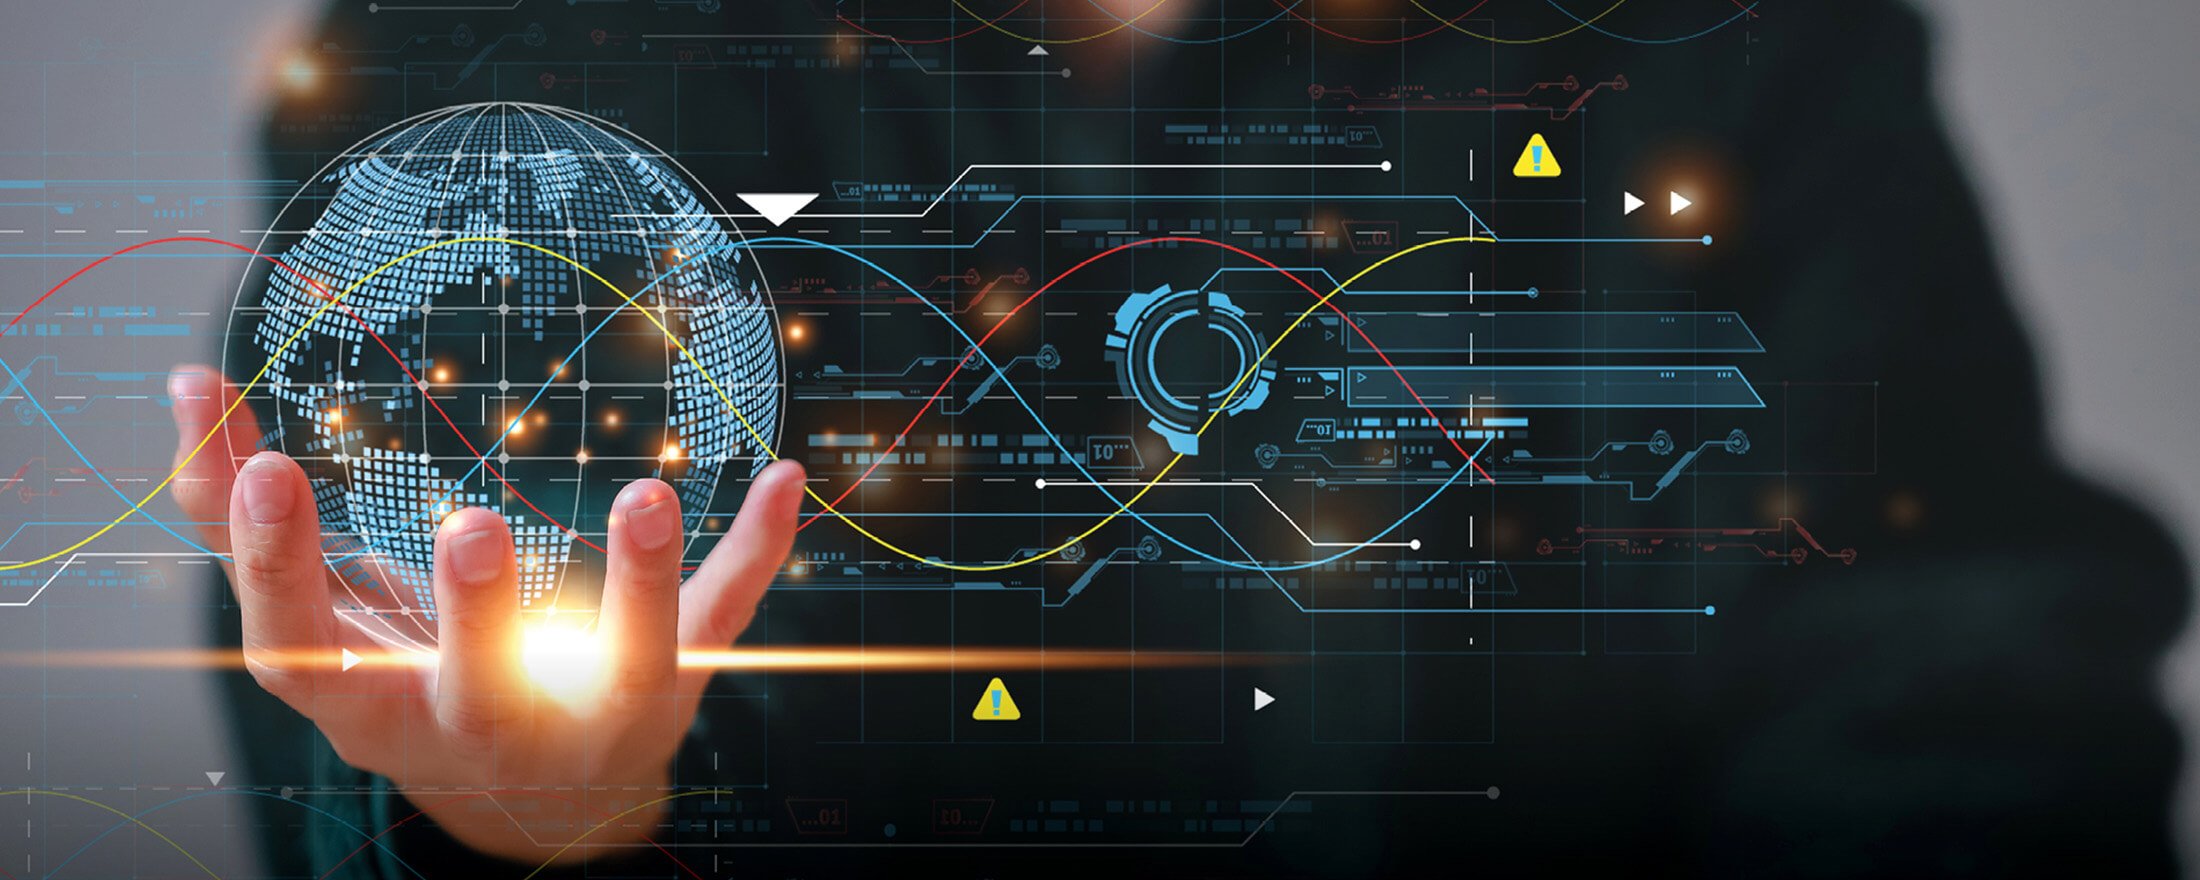 Abstract image of a person holding graphics of a globe and various technology graphics